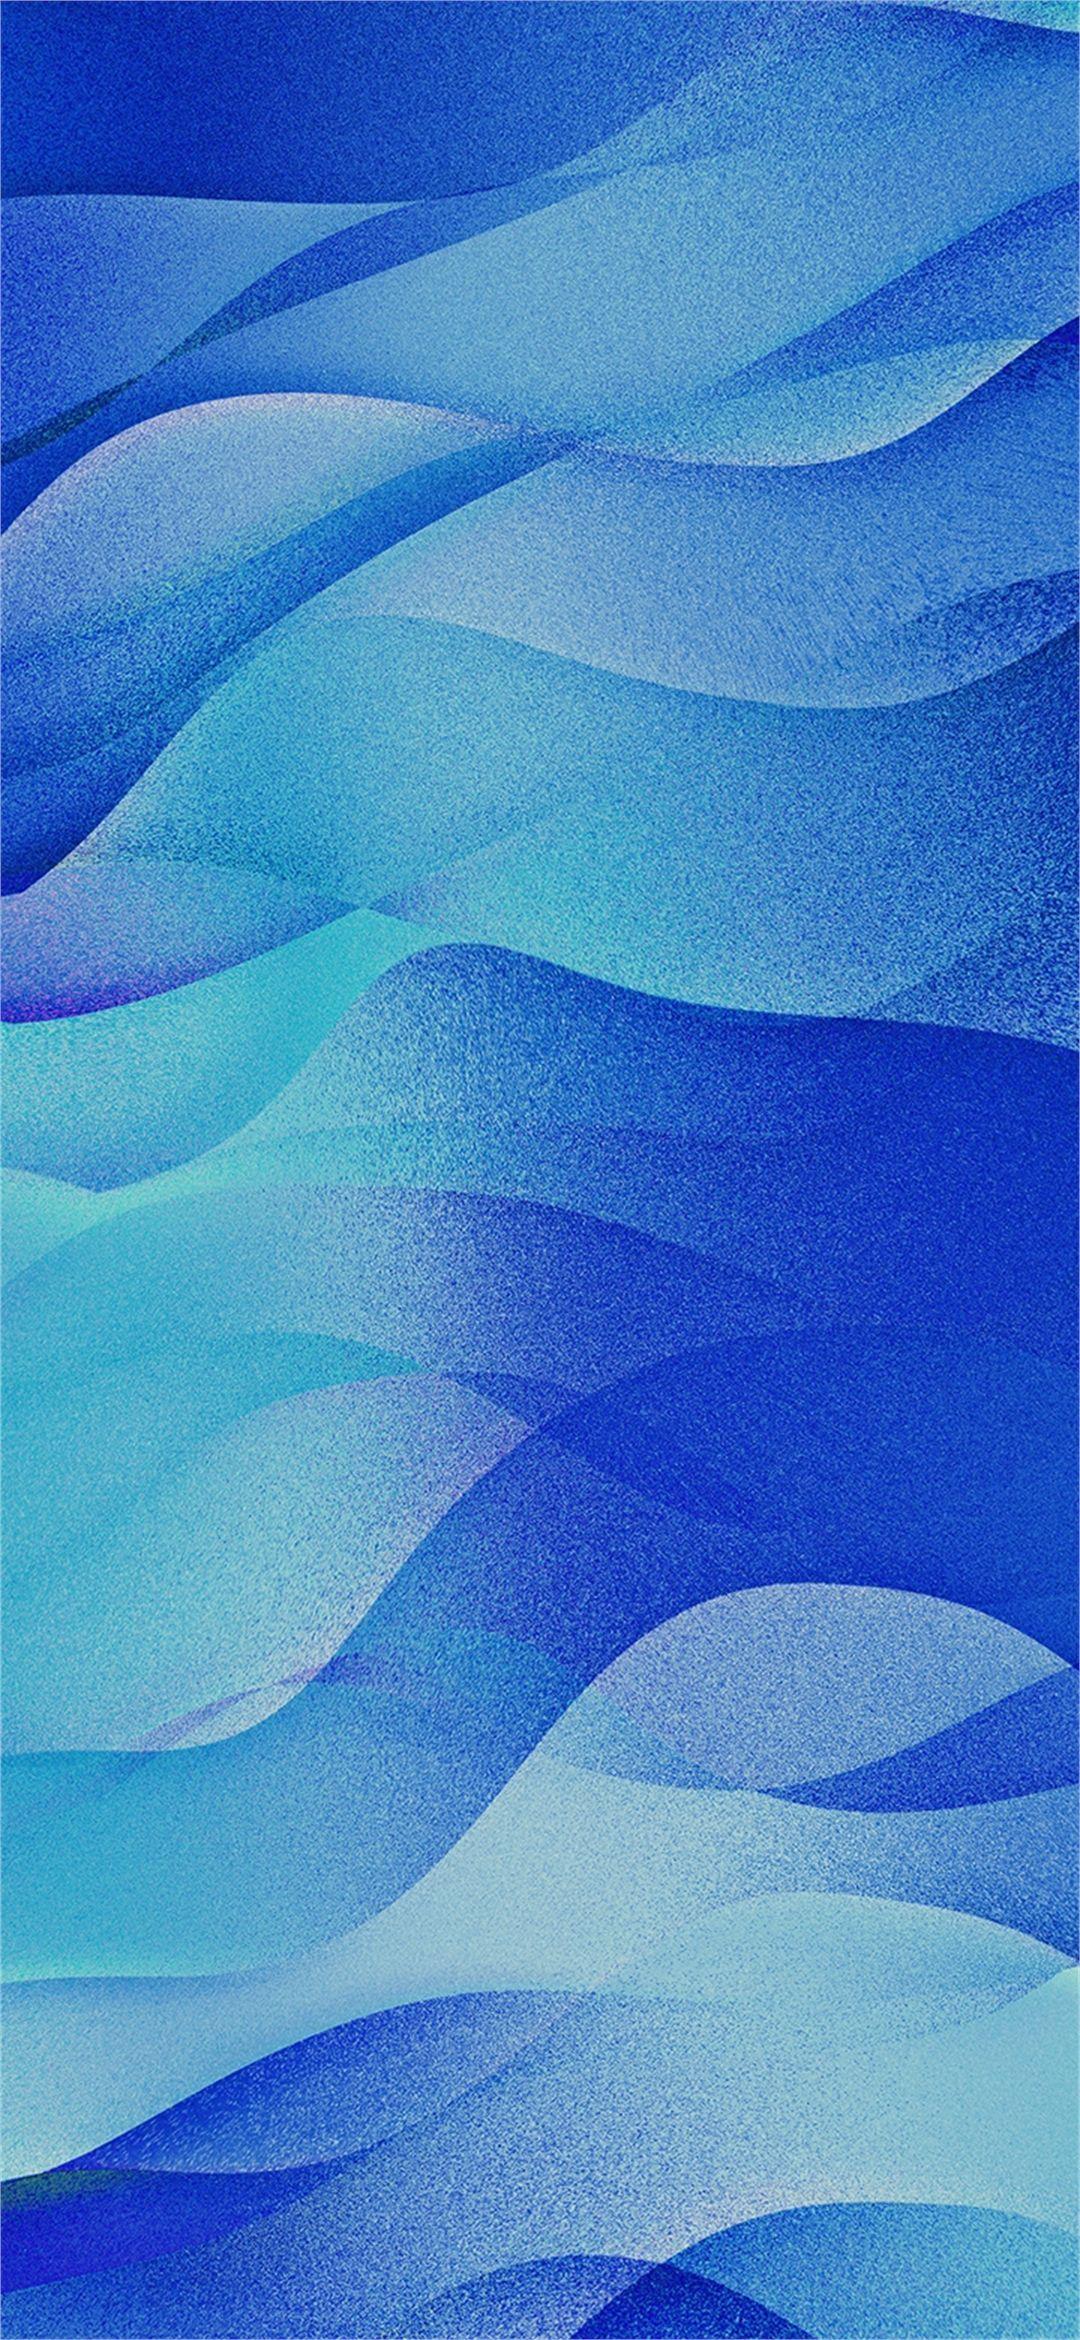 Realme 3 Pro Stock Wallpapers 13